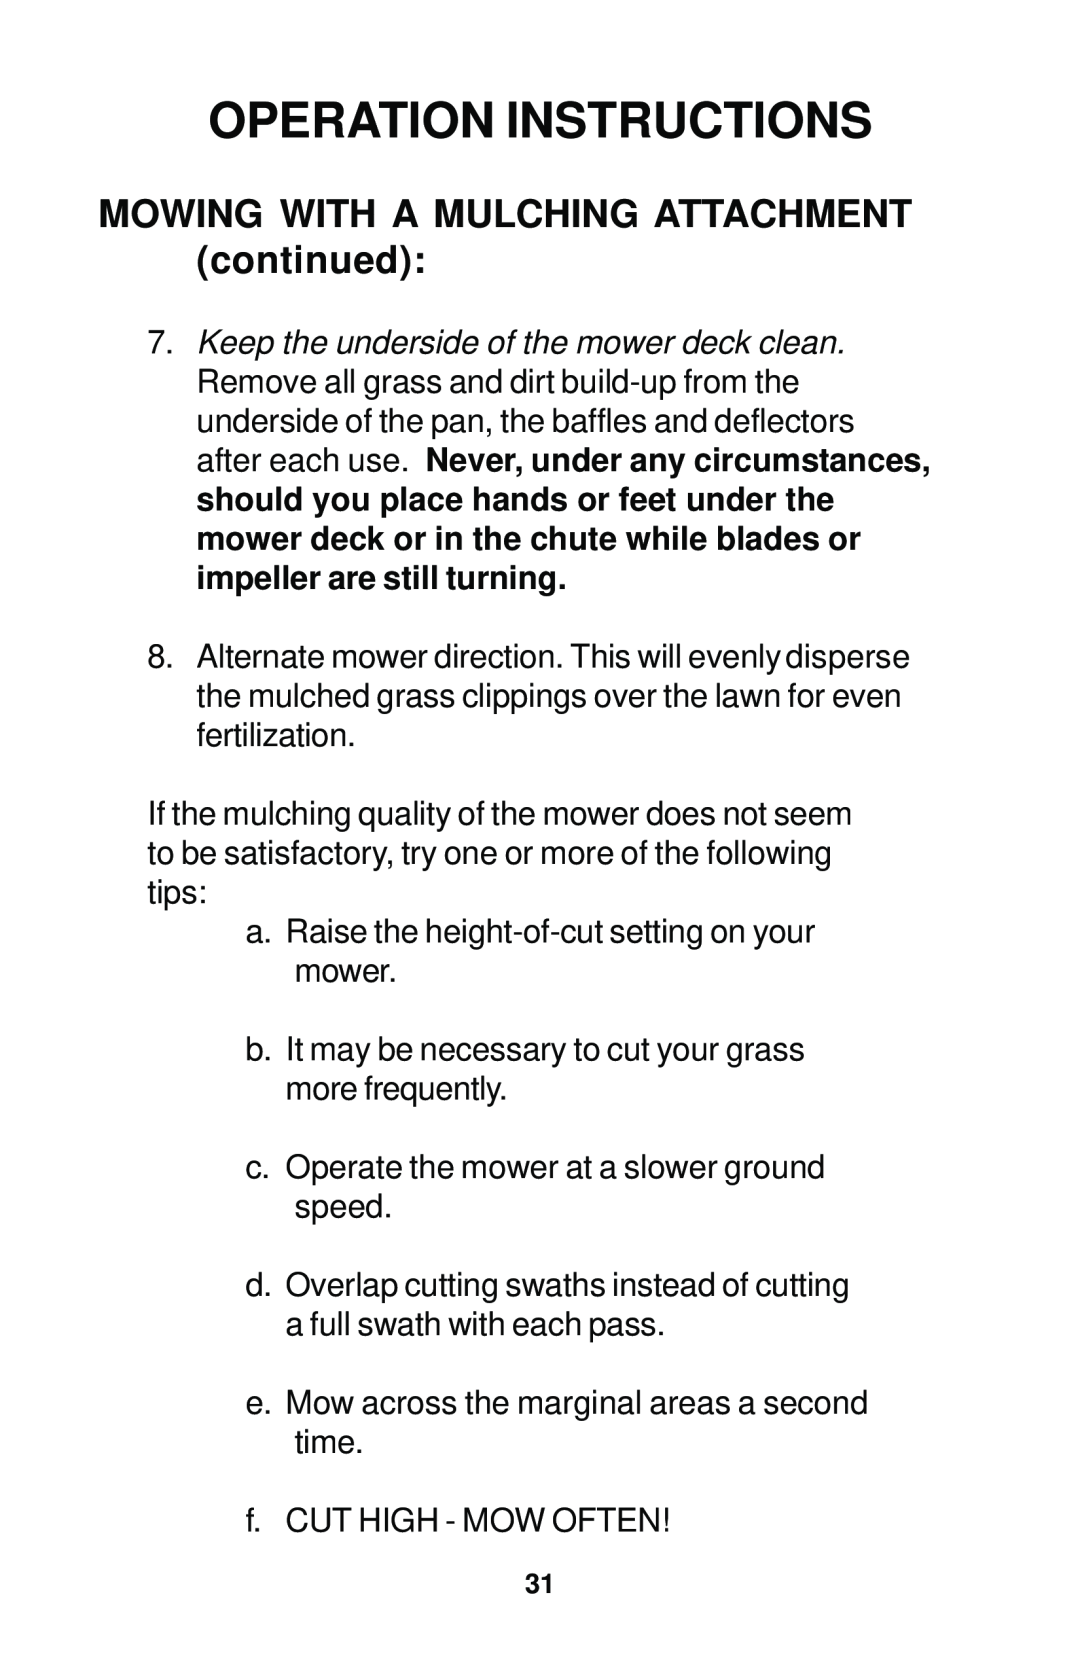 Dixon 17823-0704 manual MOWING WITH A MULCHING ATTACHMENT continued, Operation Instructions 